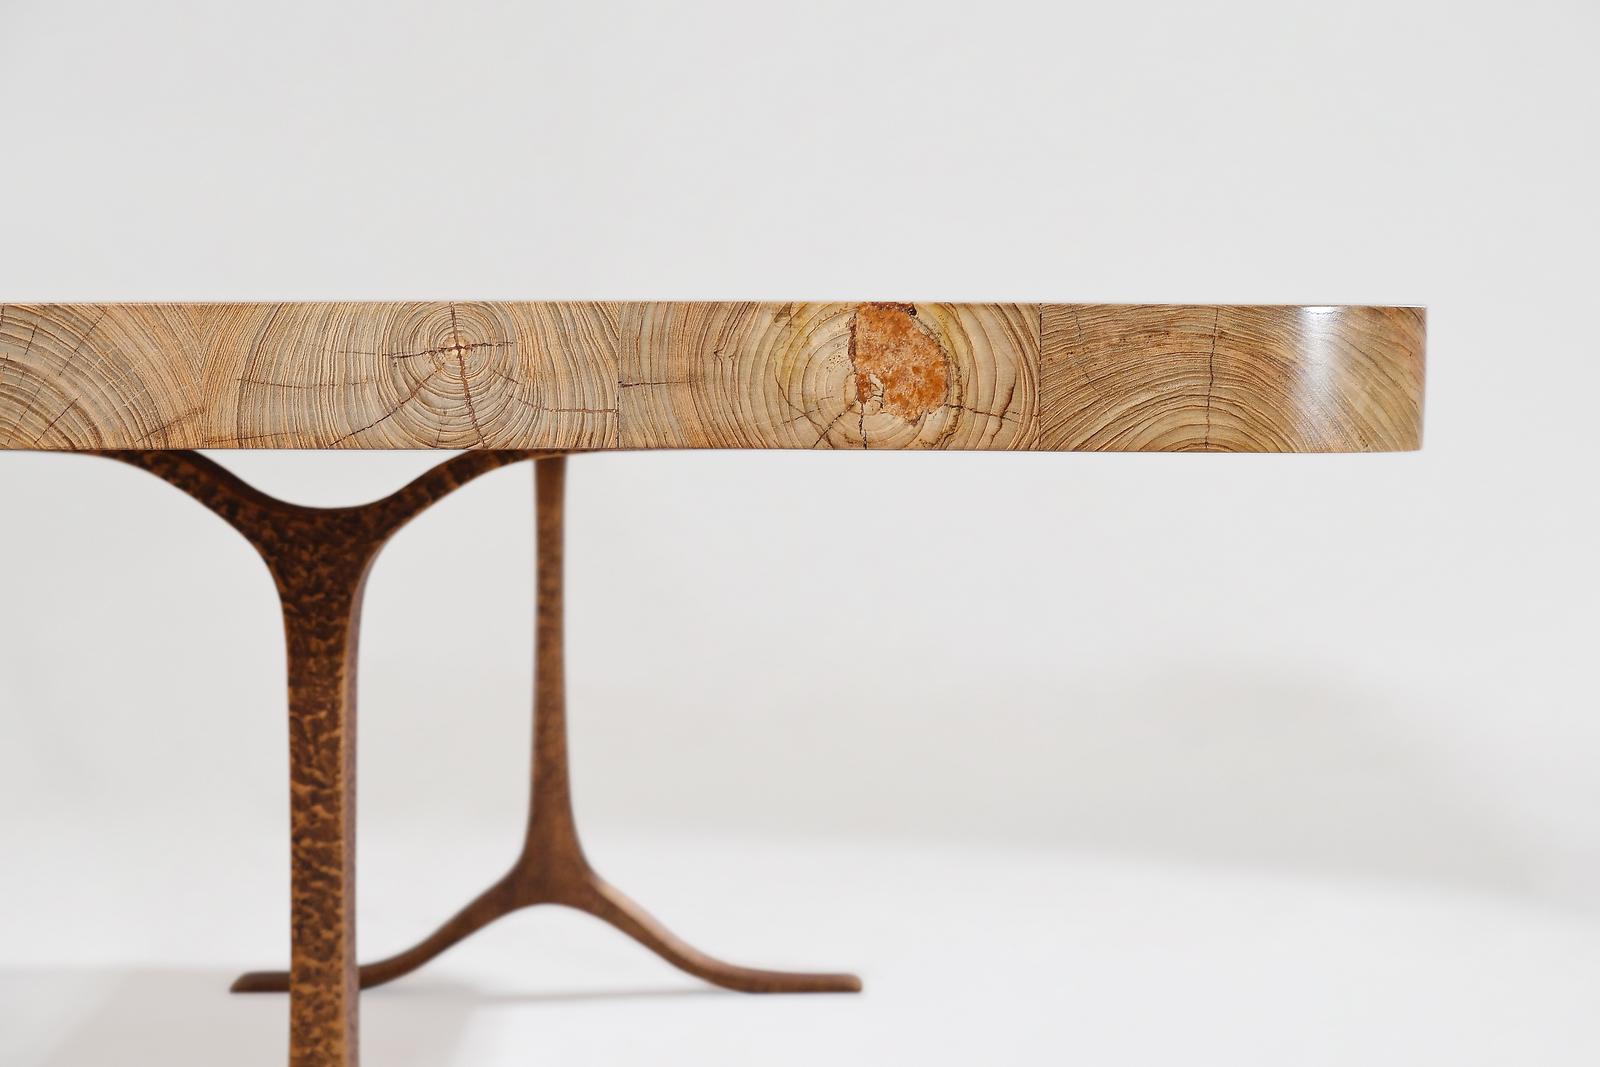 Bespoke Dining Table, Reclaimed Wood, Sand Cast Bronze Base, by P. Tendercool For Sale 4